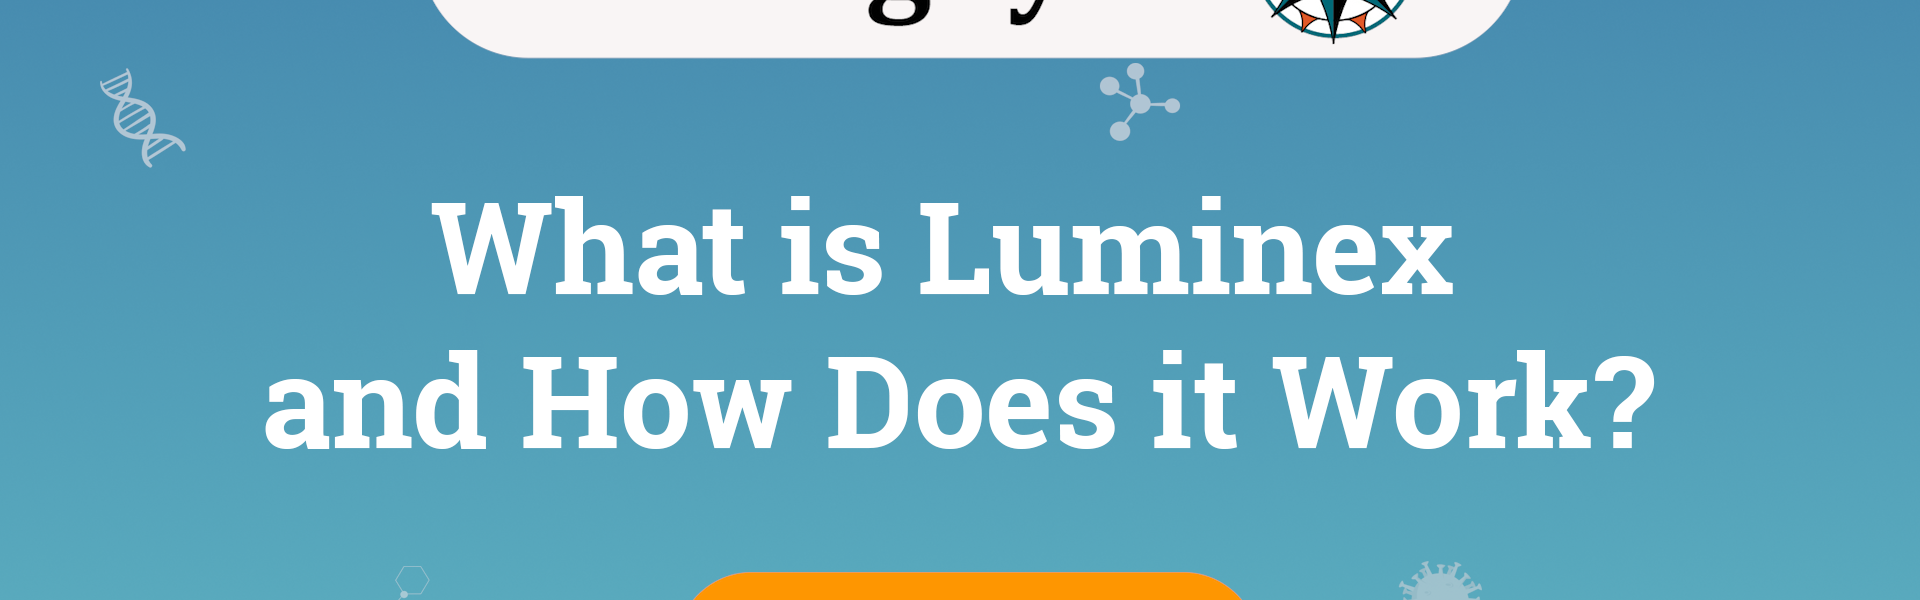 what is luminex and how does it work